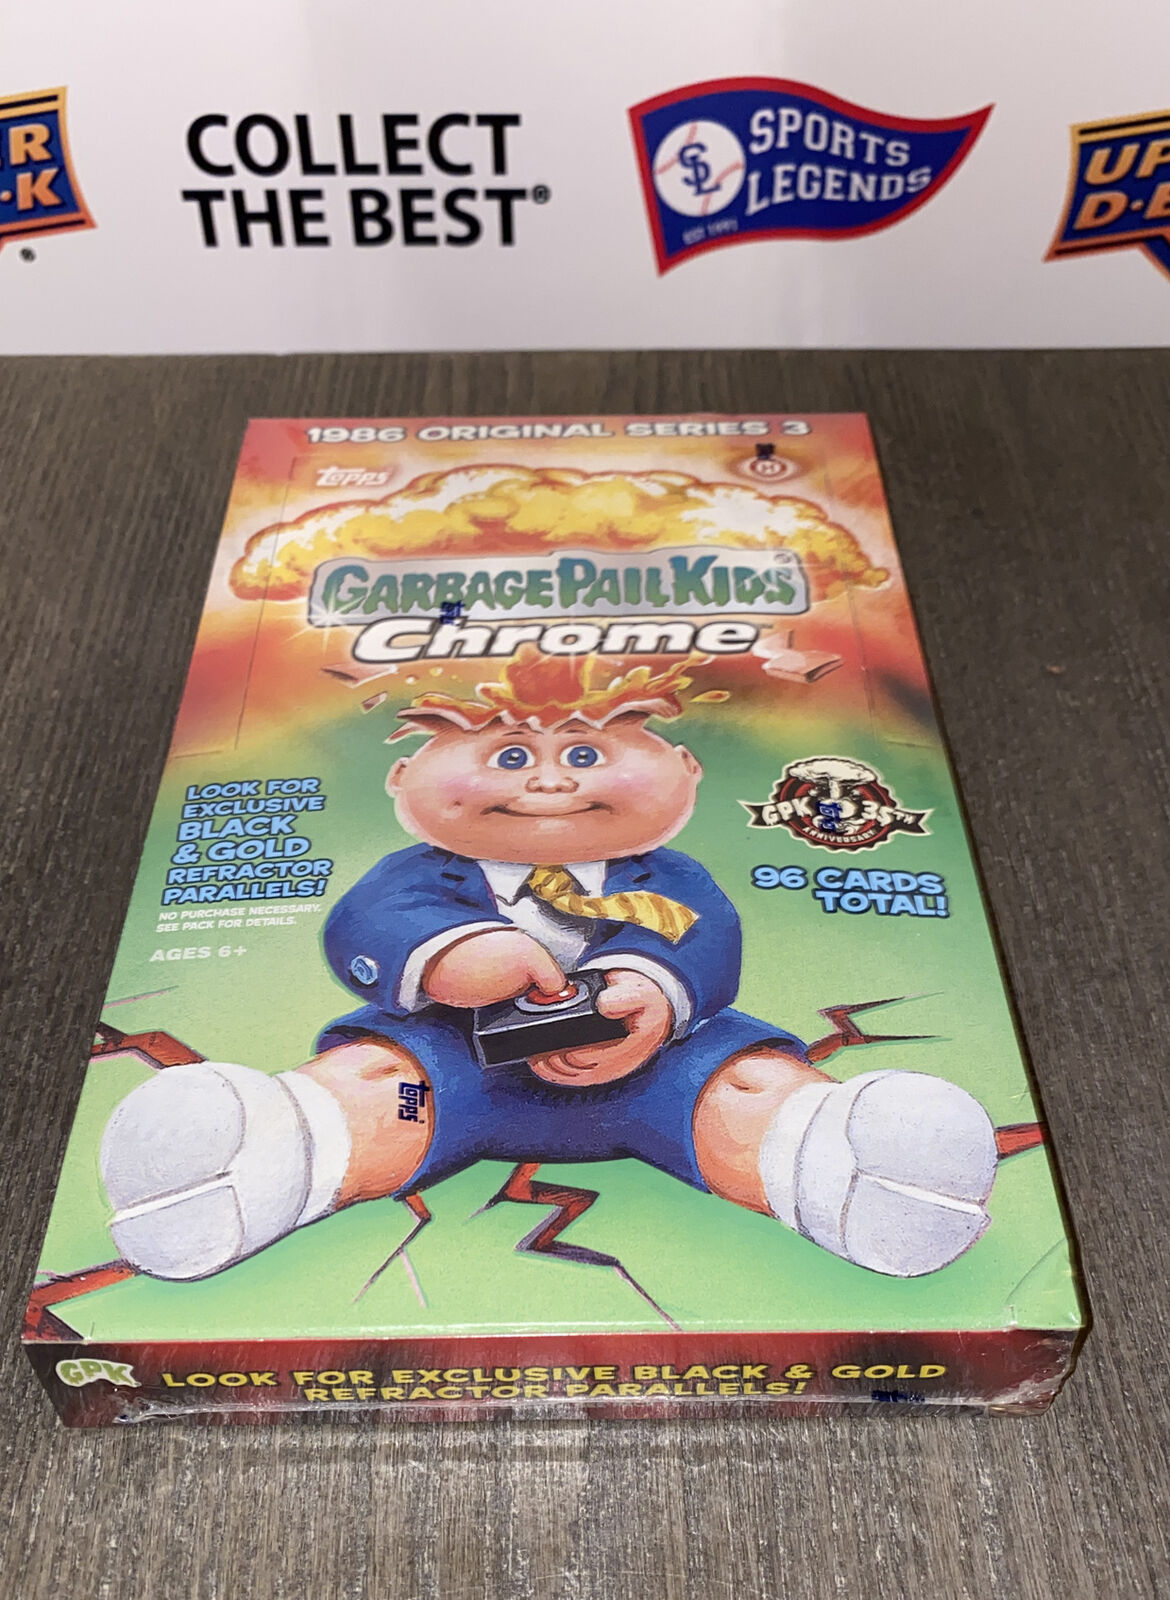 2020 TOPPS Garbage Pail Kids CHROME Series 3 Factory Sealed HOBBY Box REFRACTORS